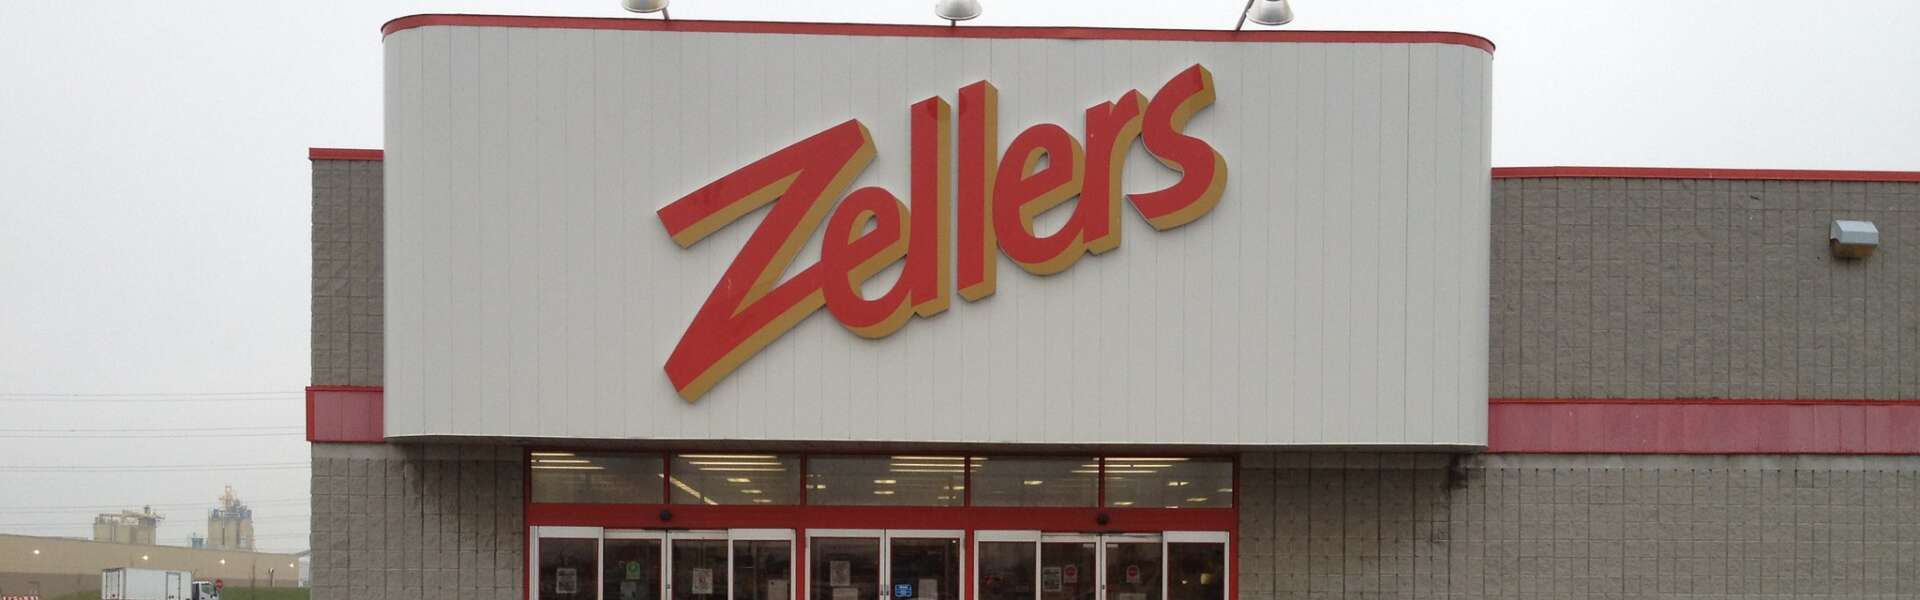 An entrance to a Zellers in a grey brick building. Above the doors is a white panel with the a large red sign proclaiming Zellers.